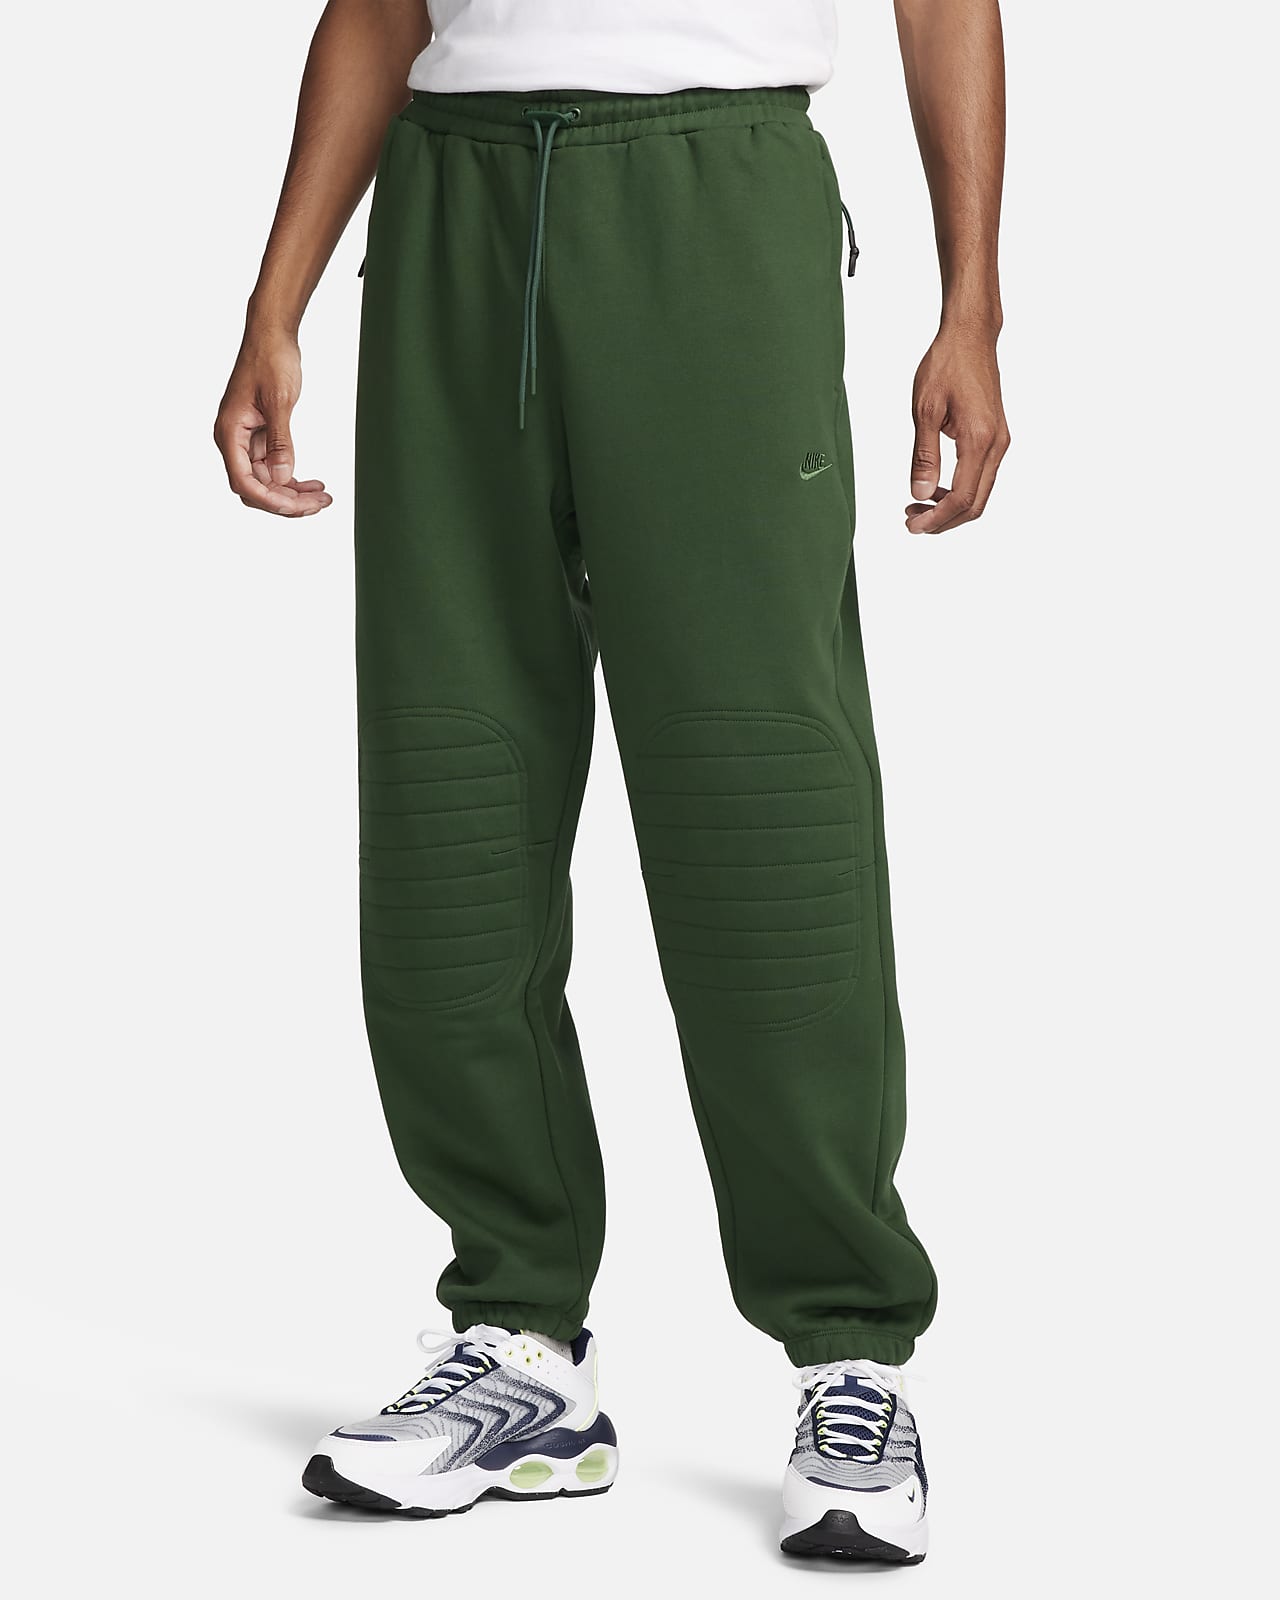 Nike Sportswear Therma-FIT Tech Pack Pantalons Repel per a l'hivern - Home